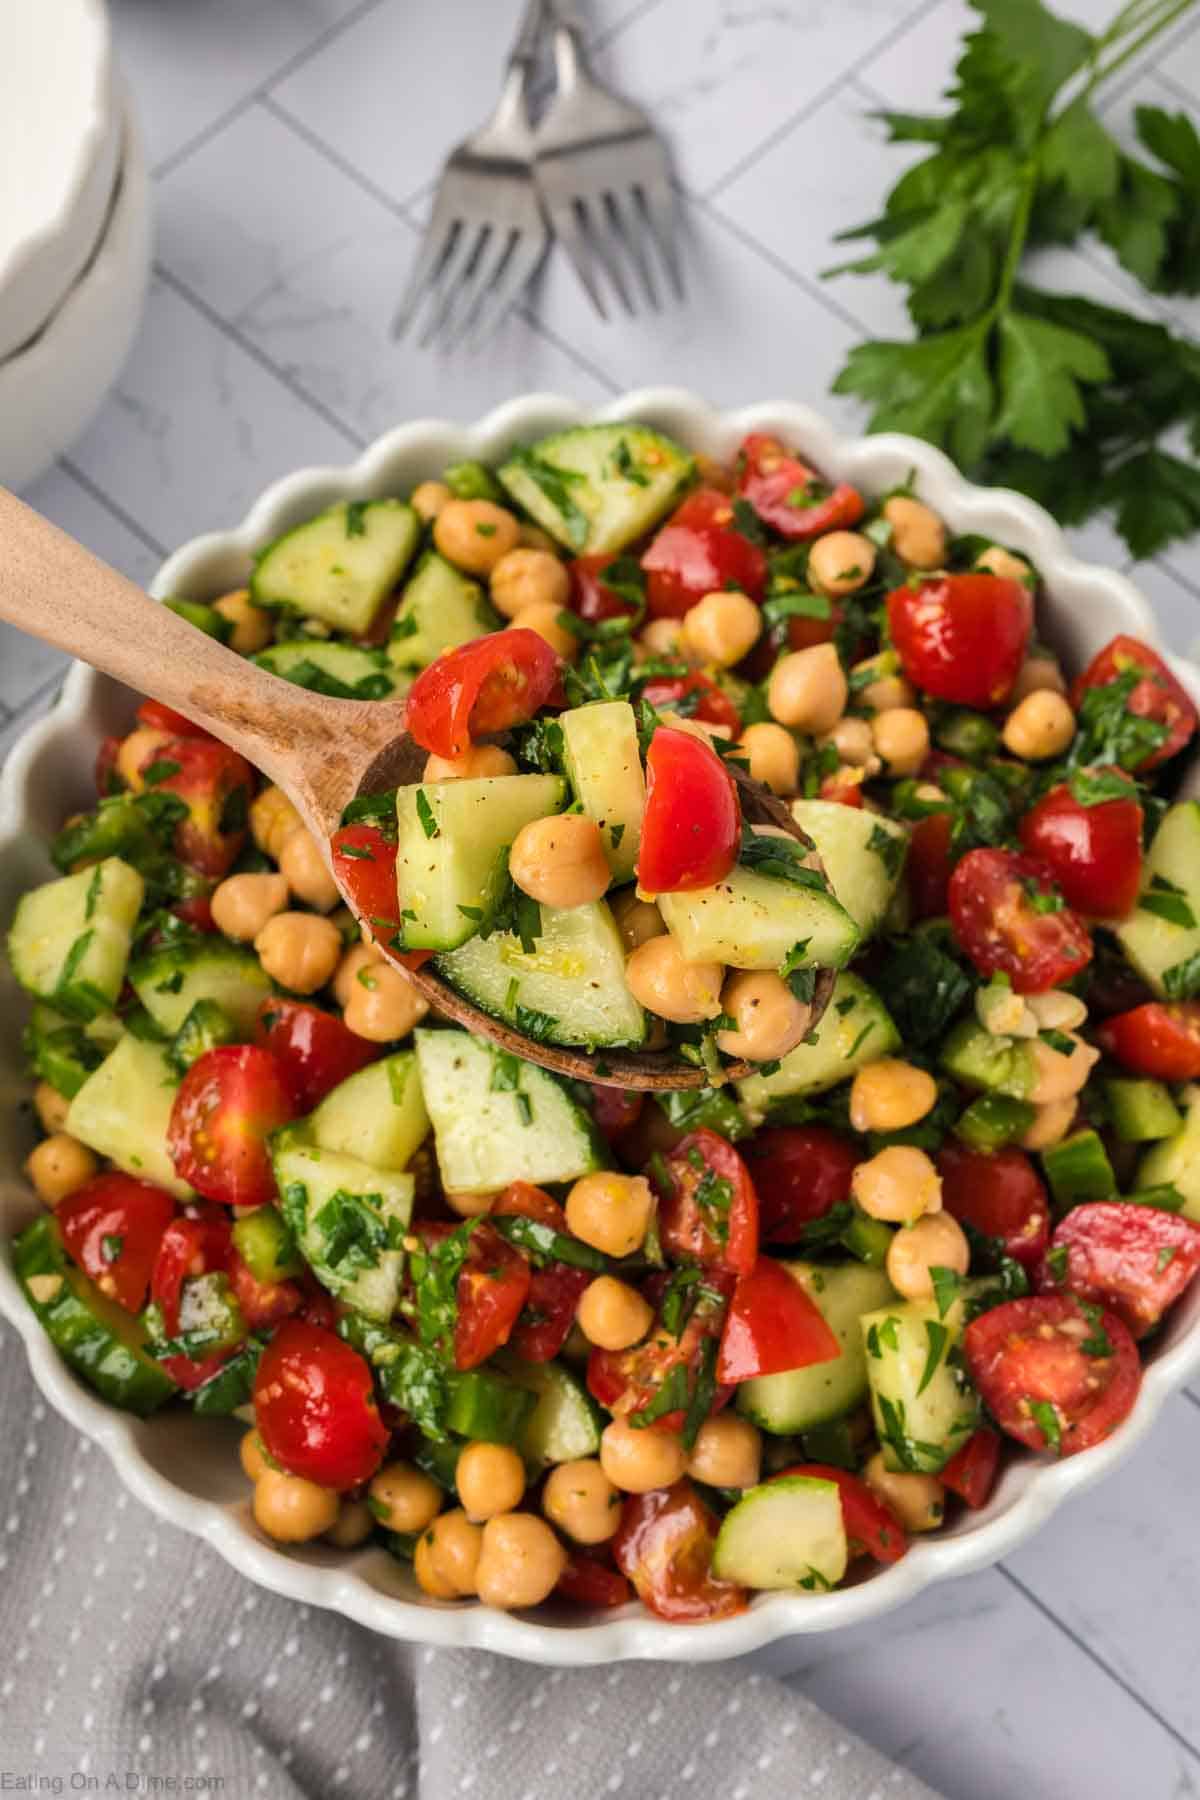 Chickpea salad in a bowl with a serving on a wooden spoon